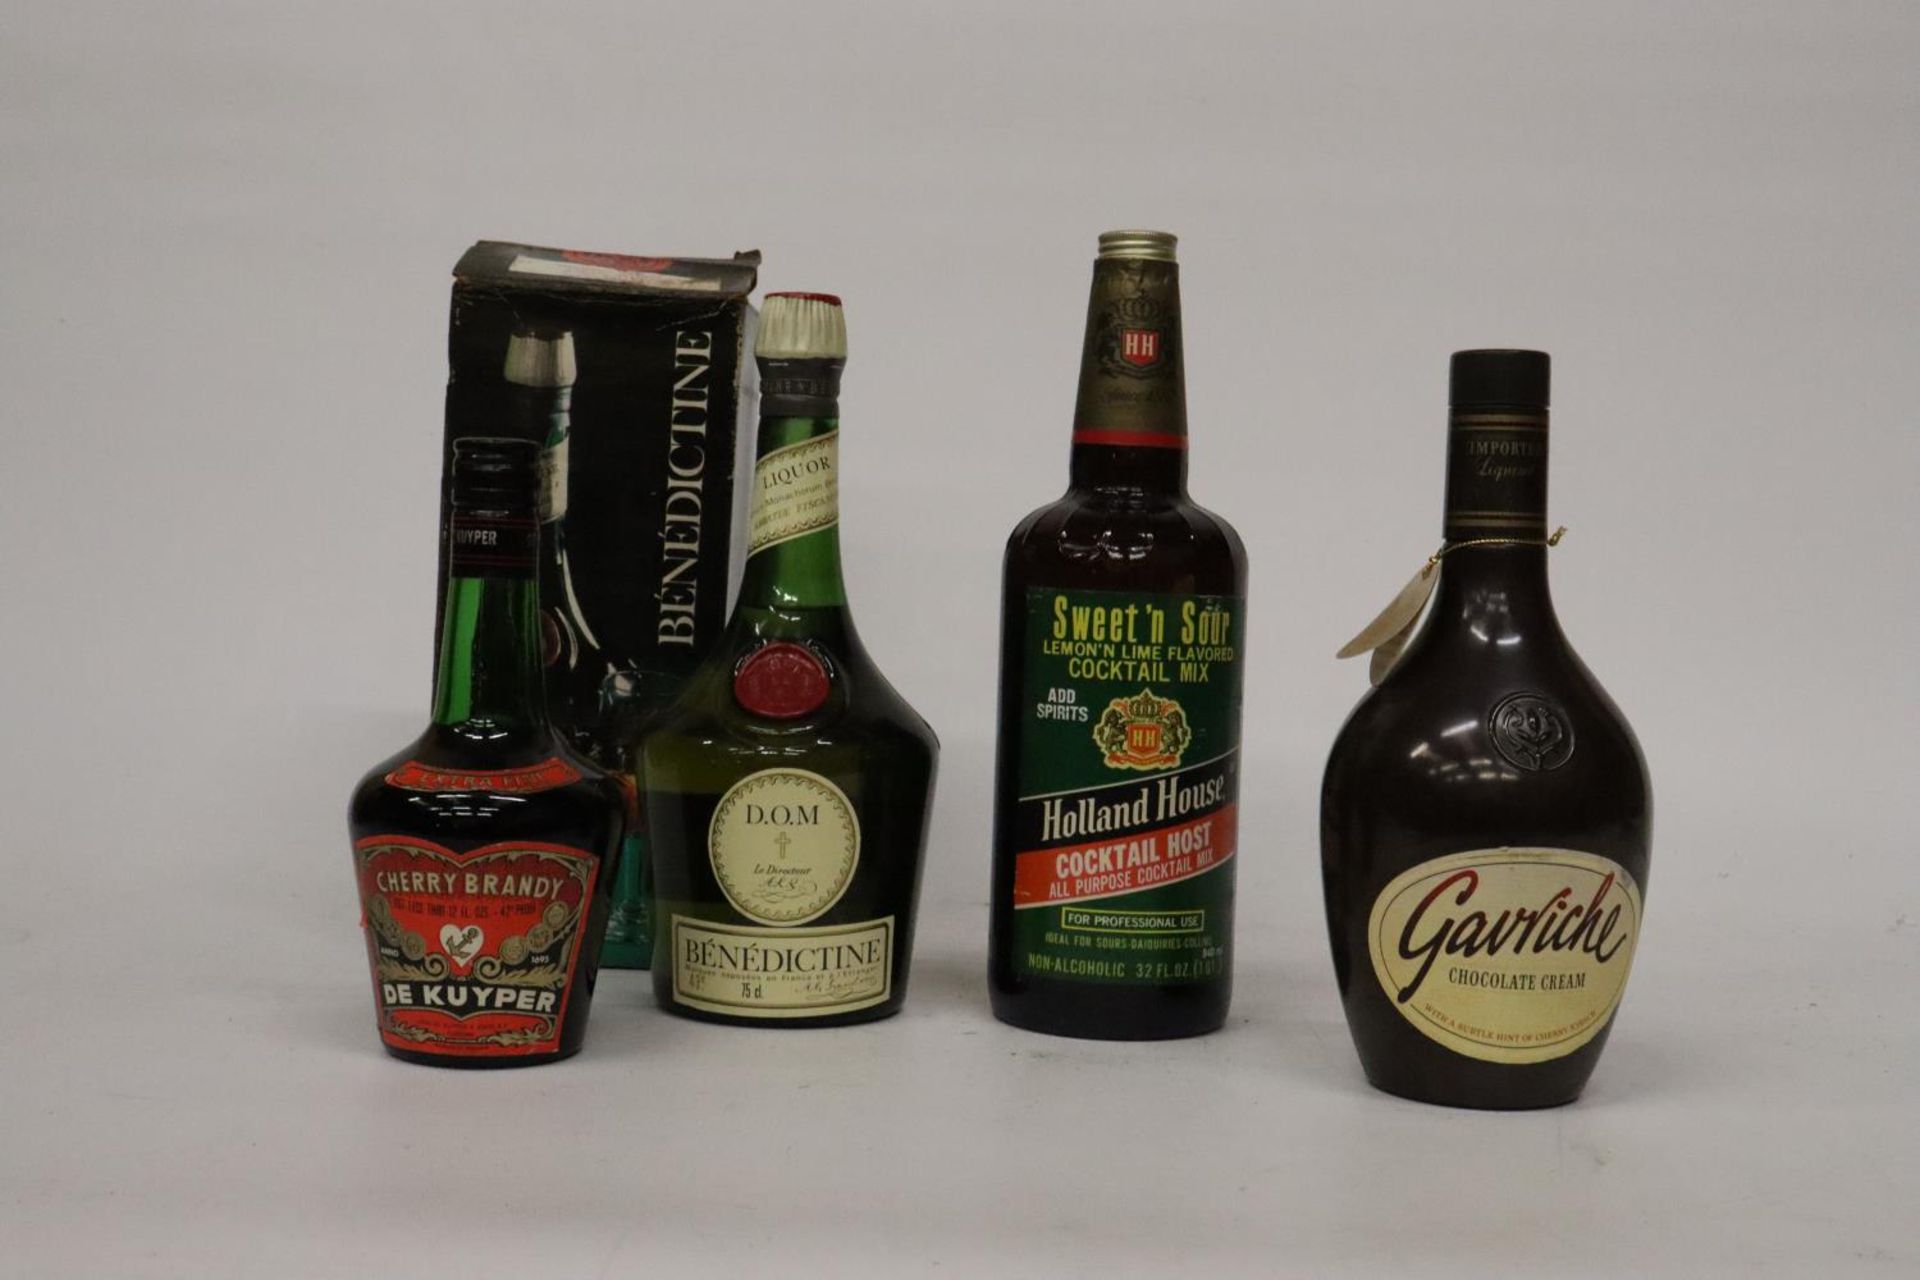 FOUR VARIOUS BOTTLES OF SPIRITS TO INCLUDE A 75CL BOTTLE OF BENEDICTINE LIQUOR, A BOTTLE OF GAVRICHE